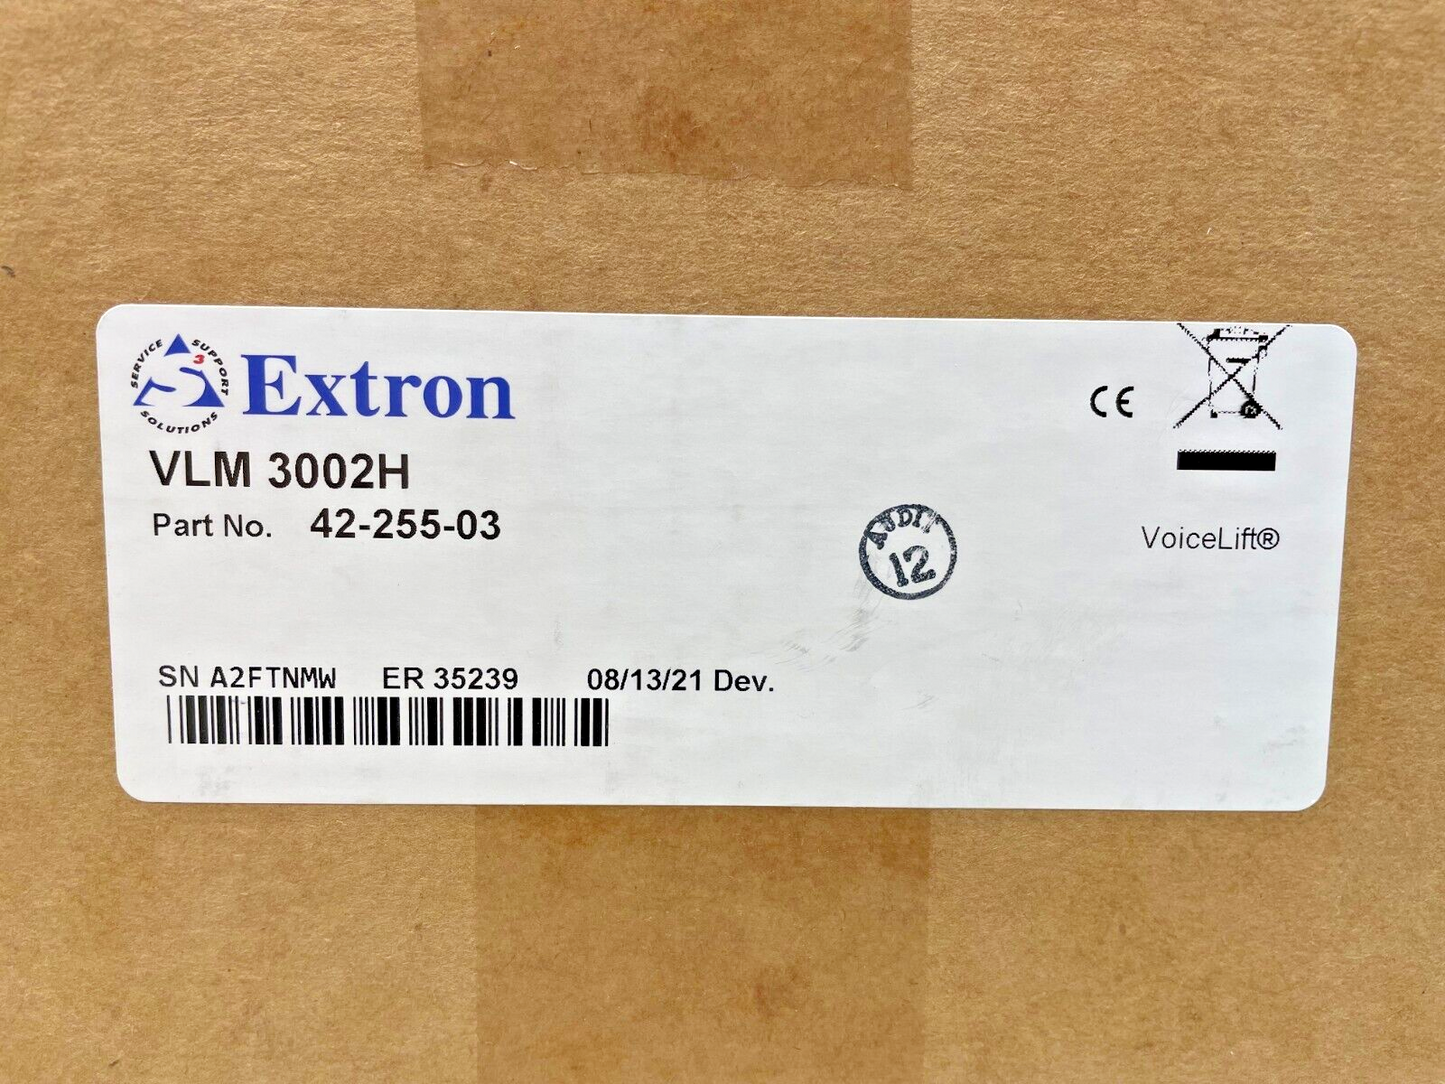 Extron 42-255-03 VLM 3002H VoiceLift Pro High Performance Wireless Microphone